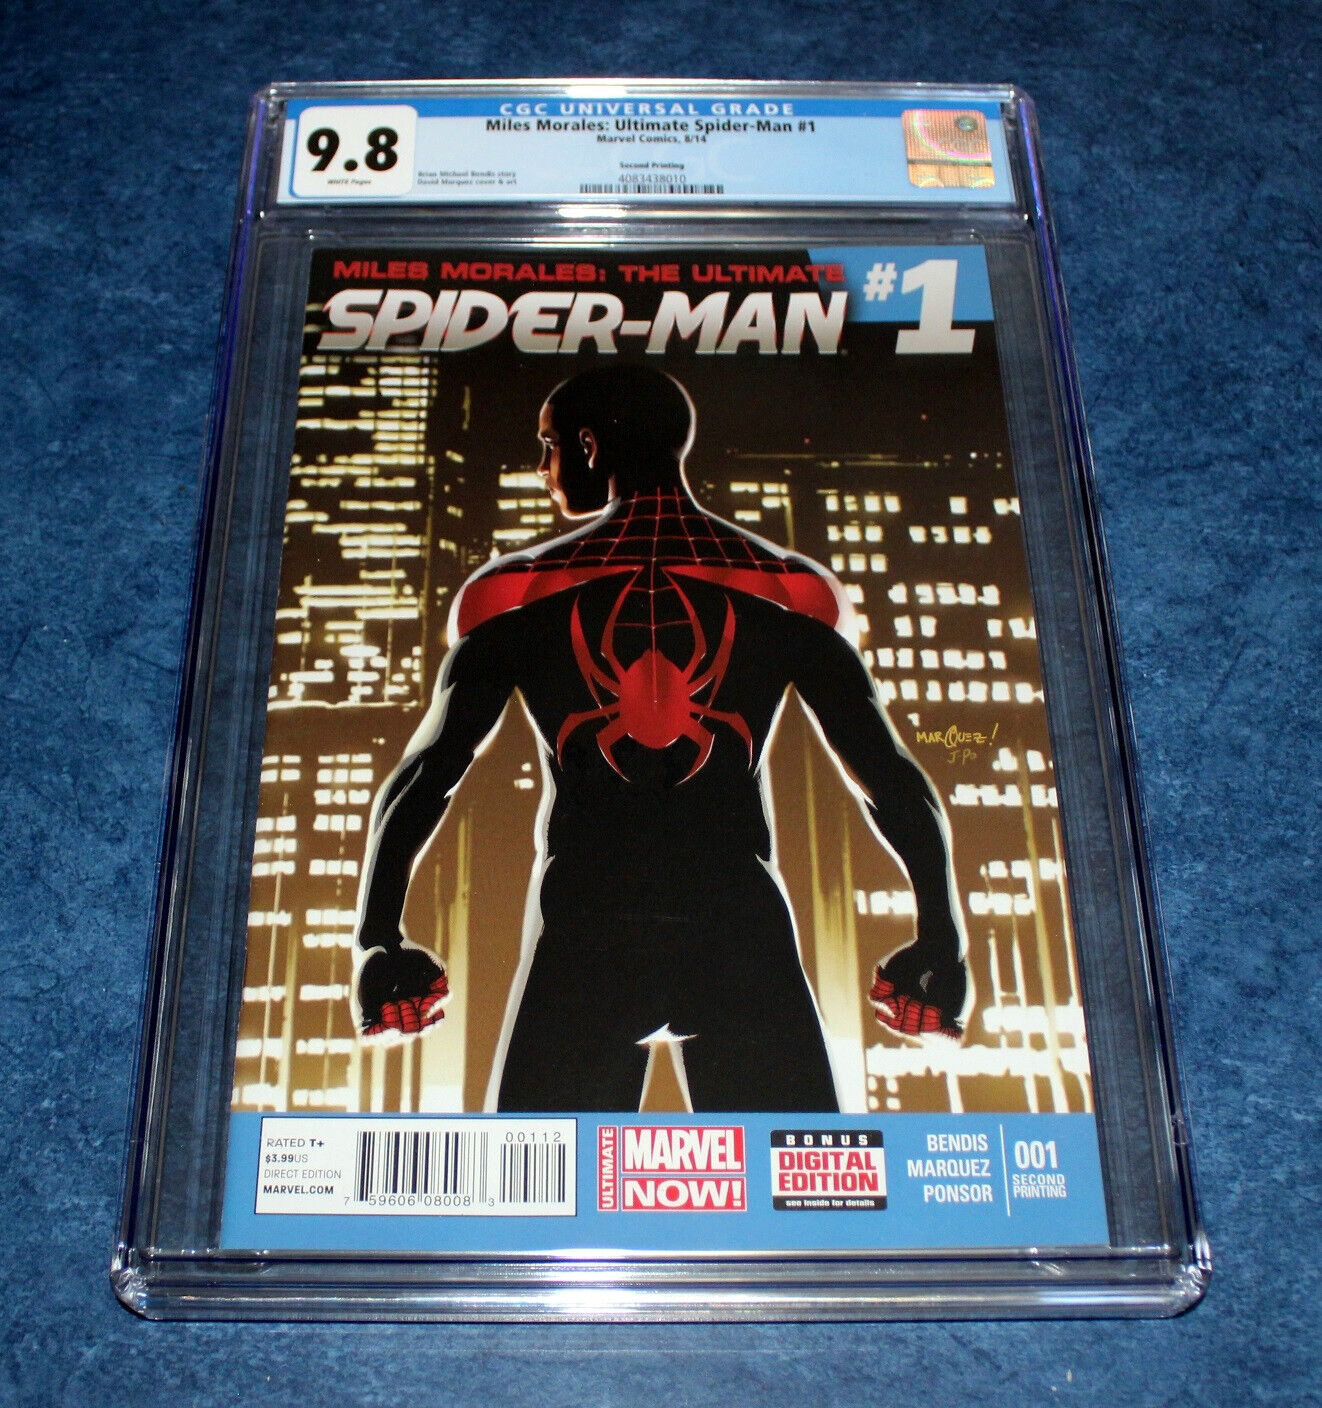 MILES MORALES the ULTIMATE SPIDER-MAN #1 2nd print CGC 9.8 MARVEL 2014 RARE NM/M